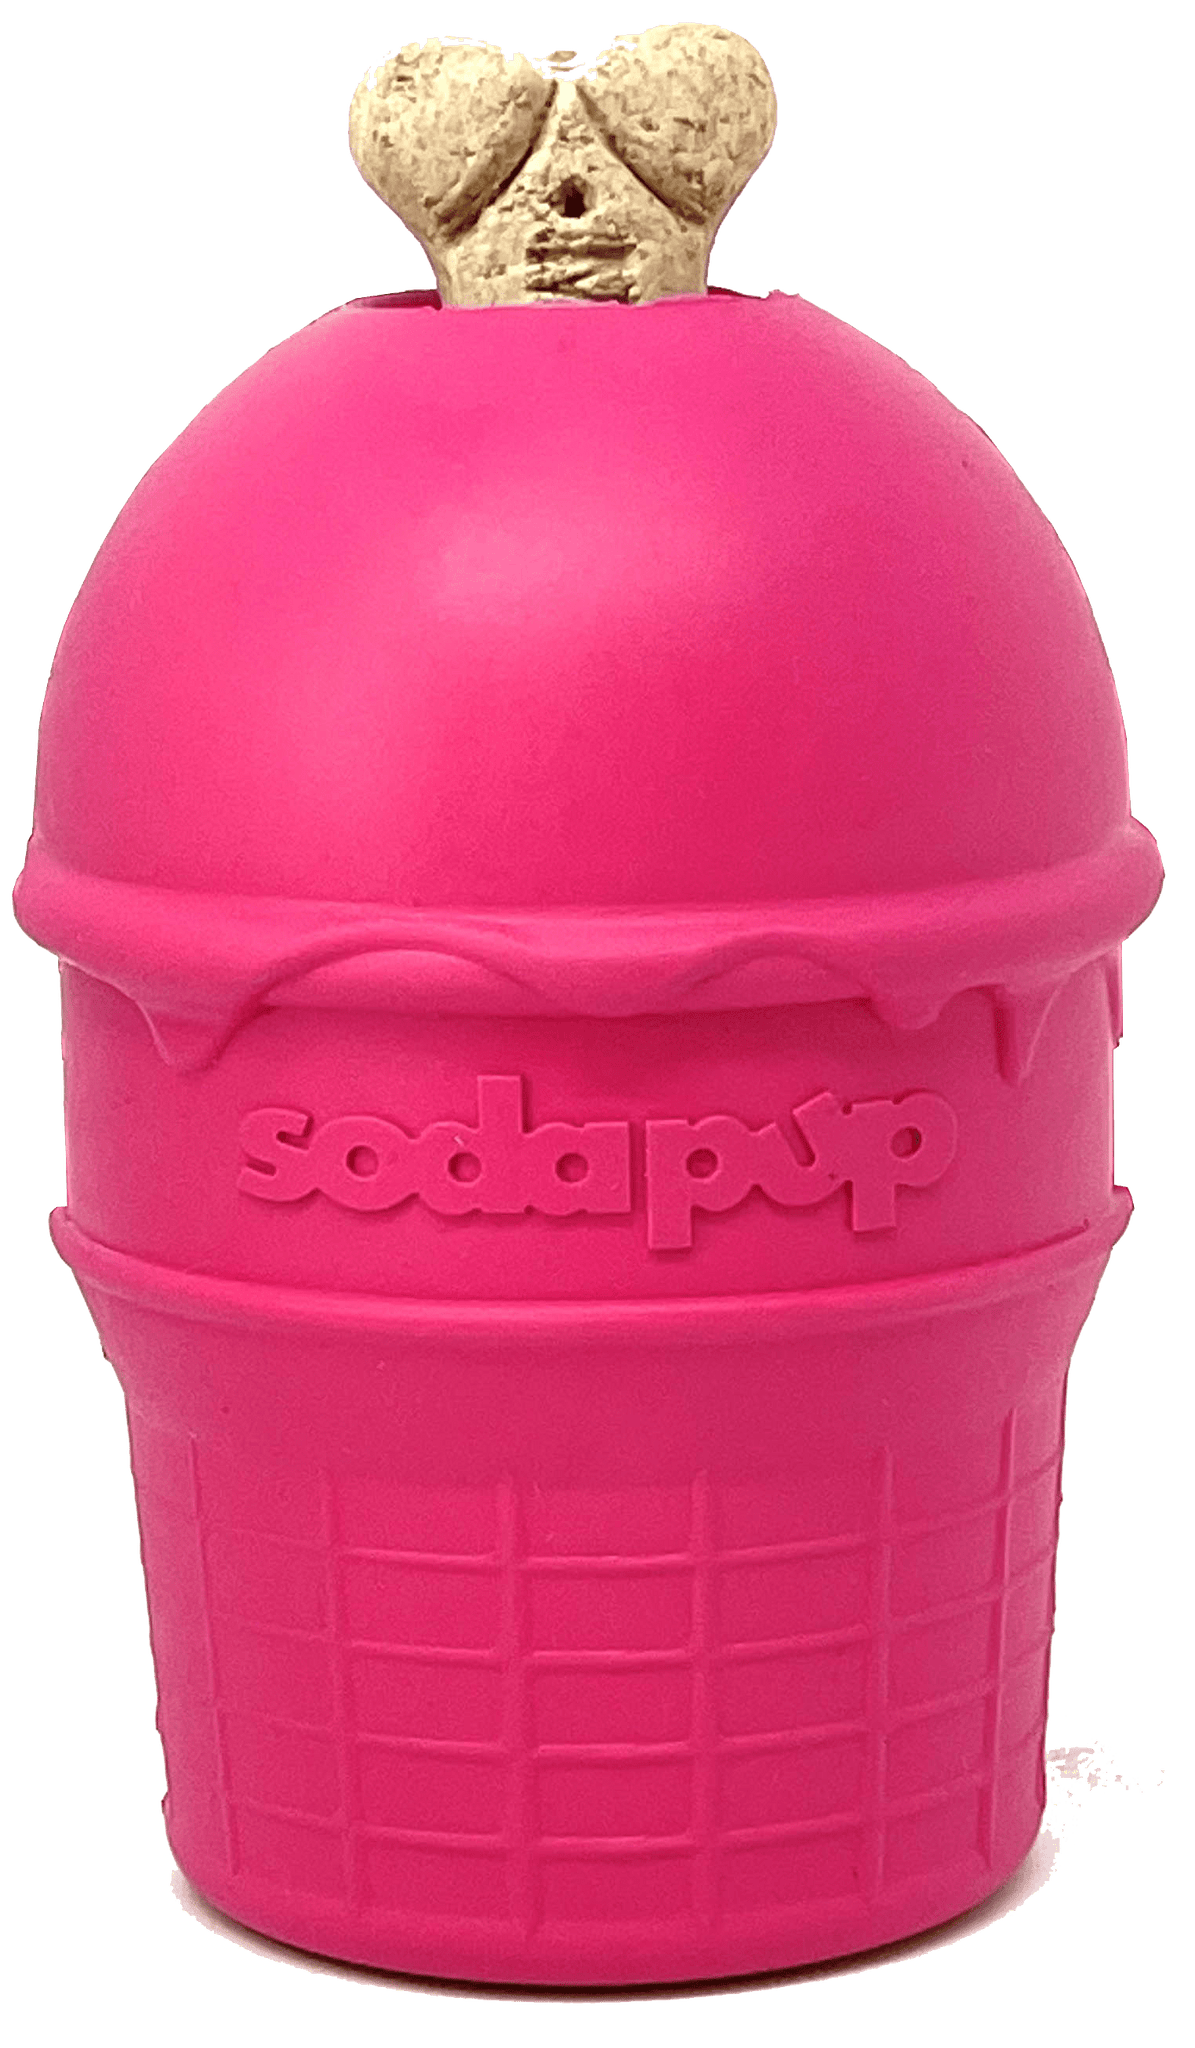 SodaPup - Love Cube Durable Rubber Chew Toy & Treat Dispenser